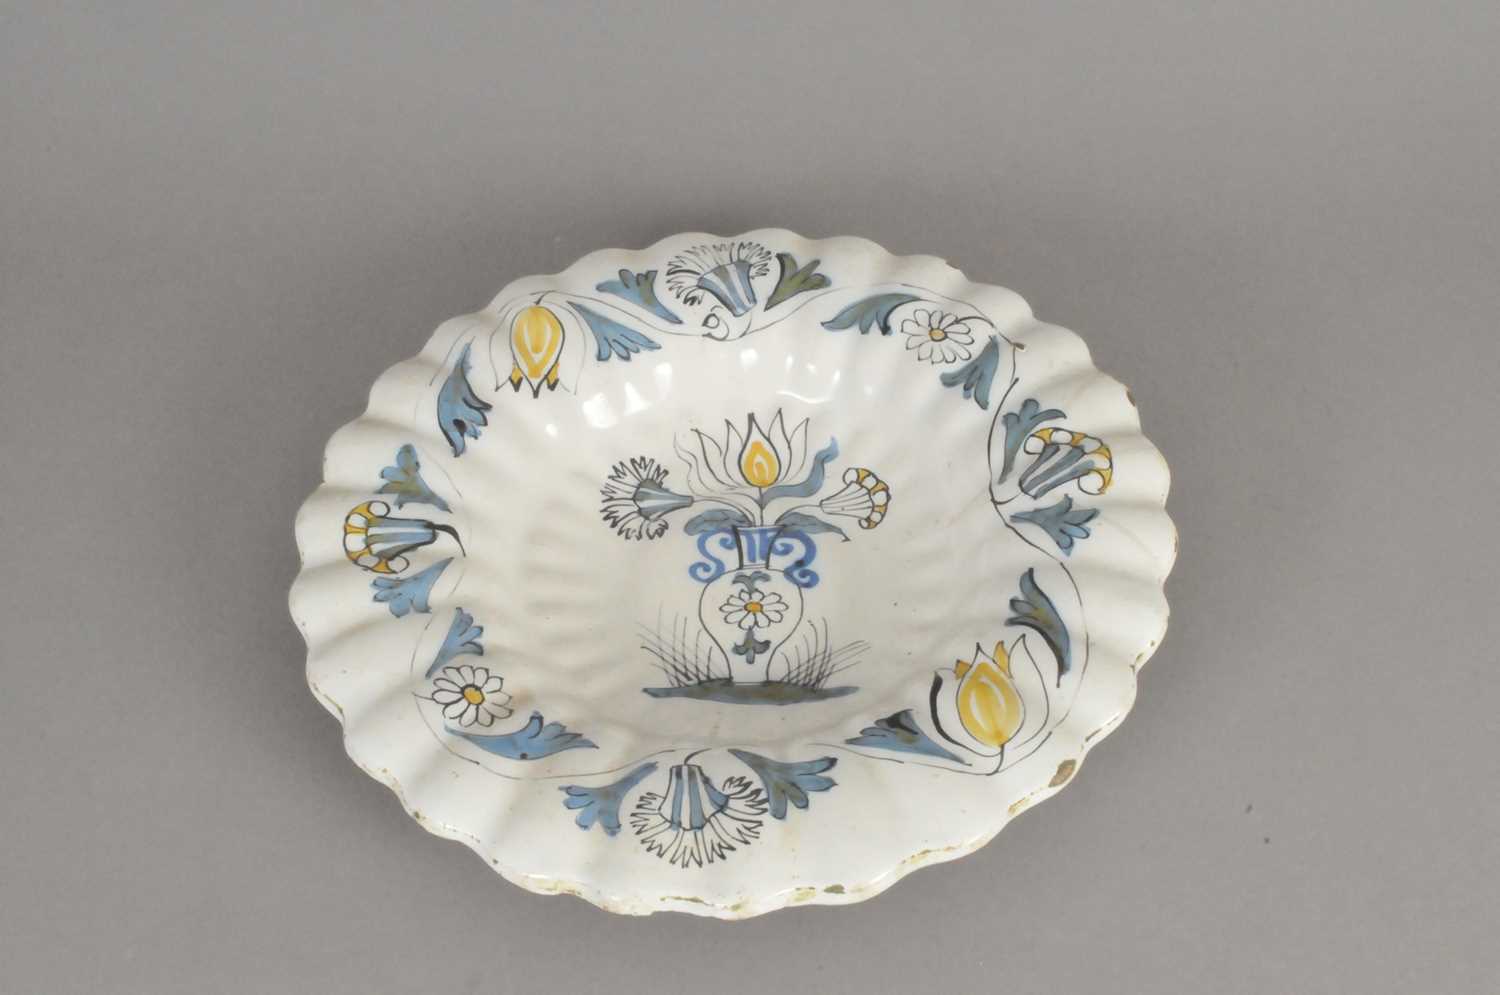 Lot 279 - Continental Delft lobed polychrome charger, 19th century